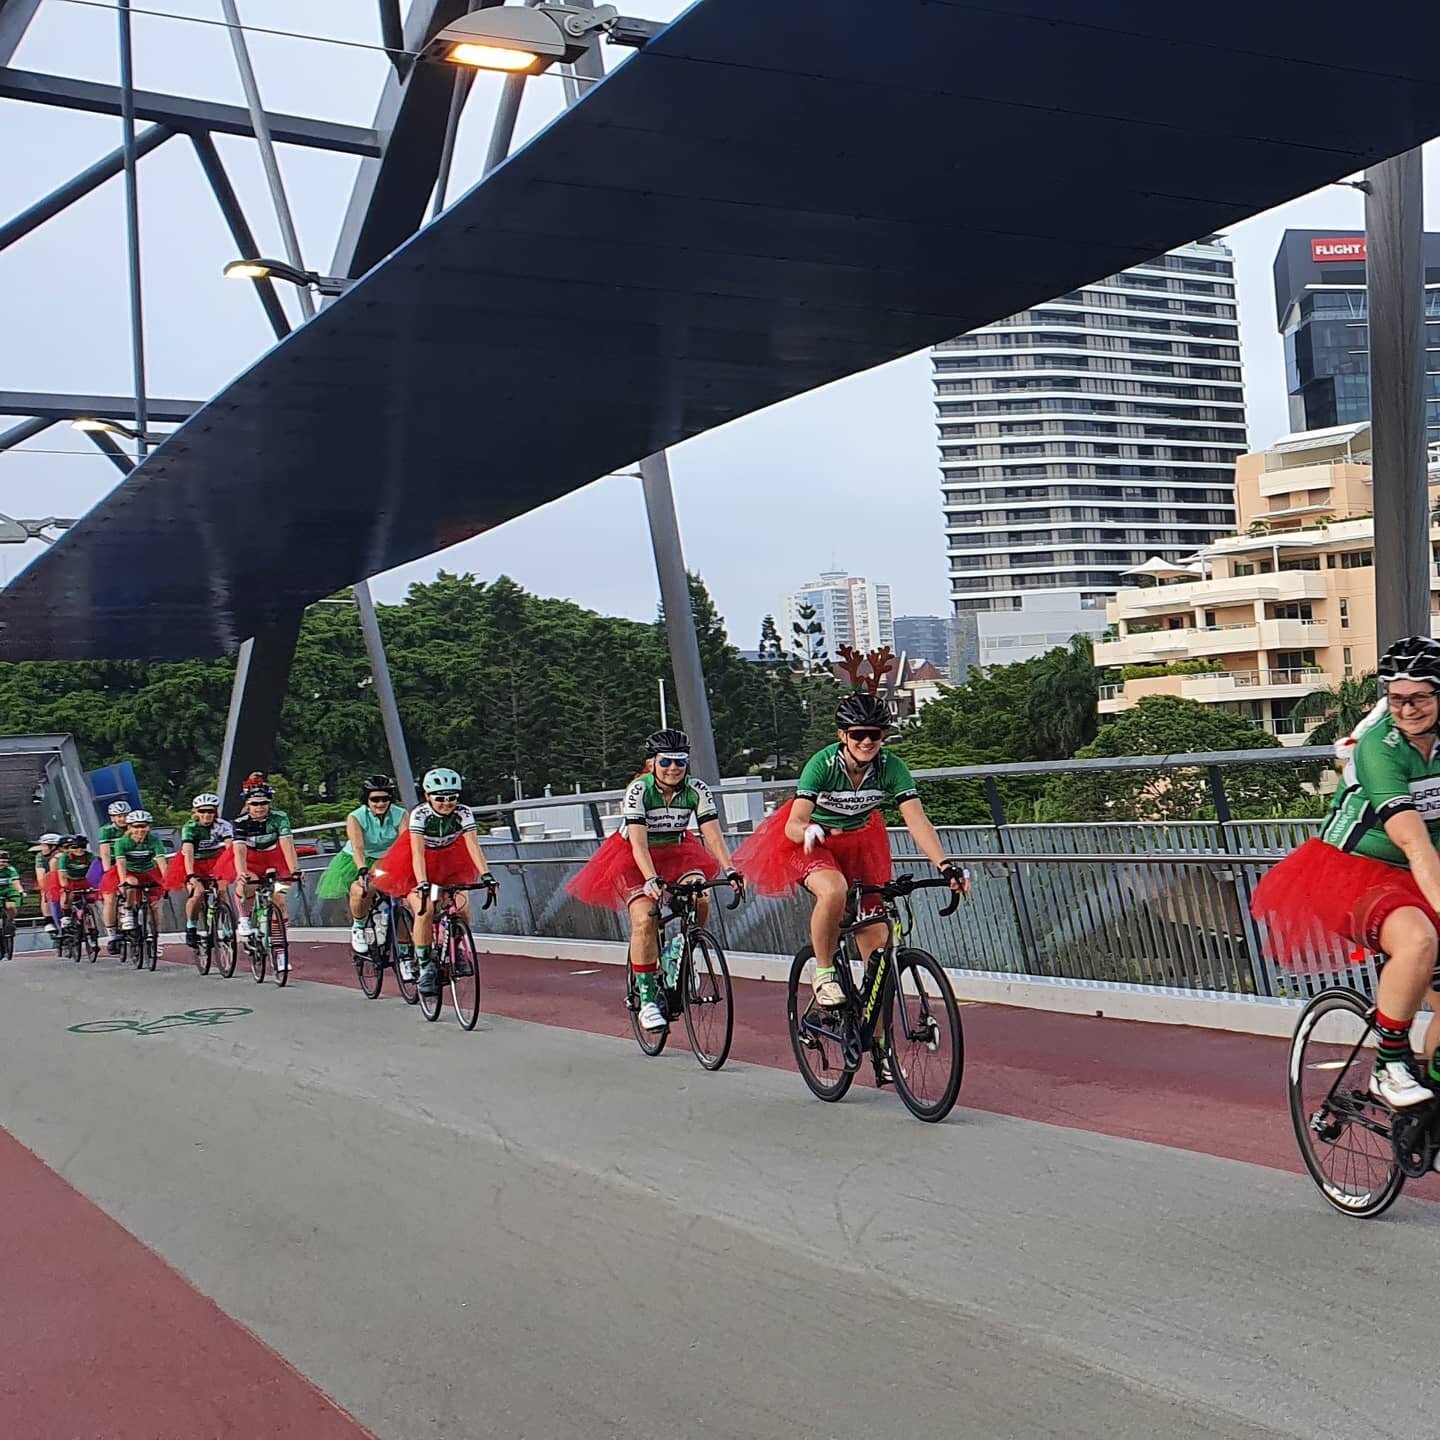 The final KPCC WOW (Womens only Wednesday) for 2020!  We dressed in our Christmas kit and had a very merry ride around the river in our #greenwhitered ! Bring on WOW in 2021! Merry Christmas! #clublife #greenwhiteblack #kangaroopointcc #championsyste